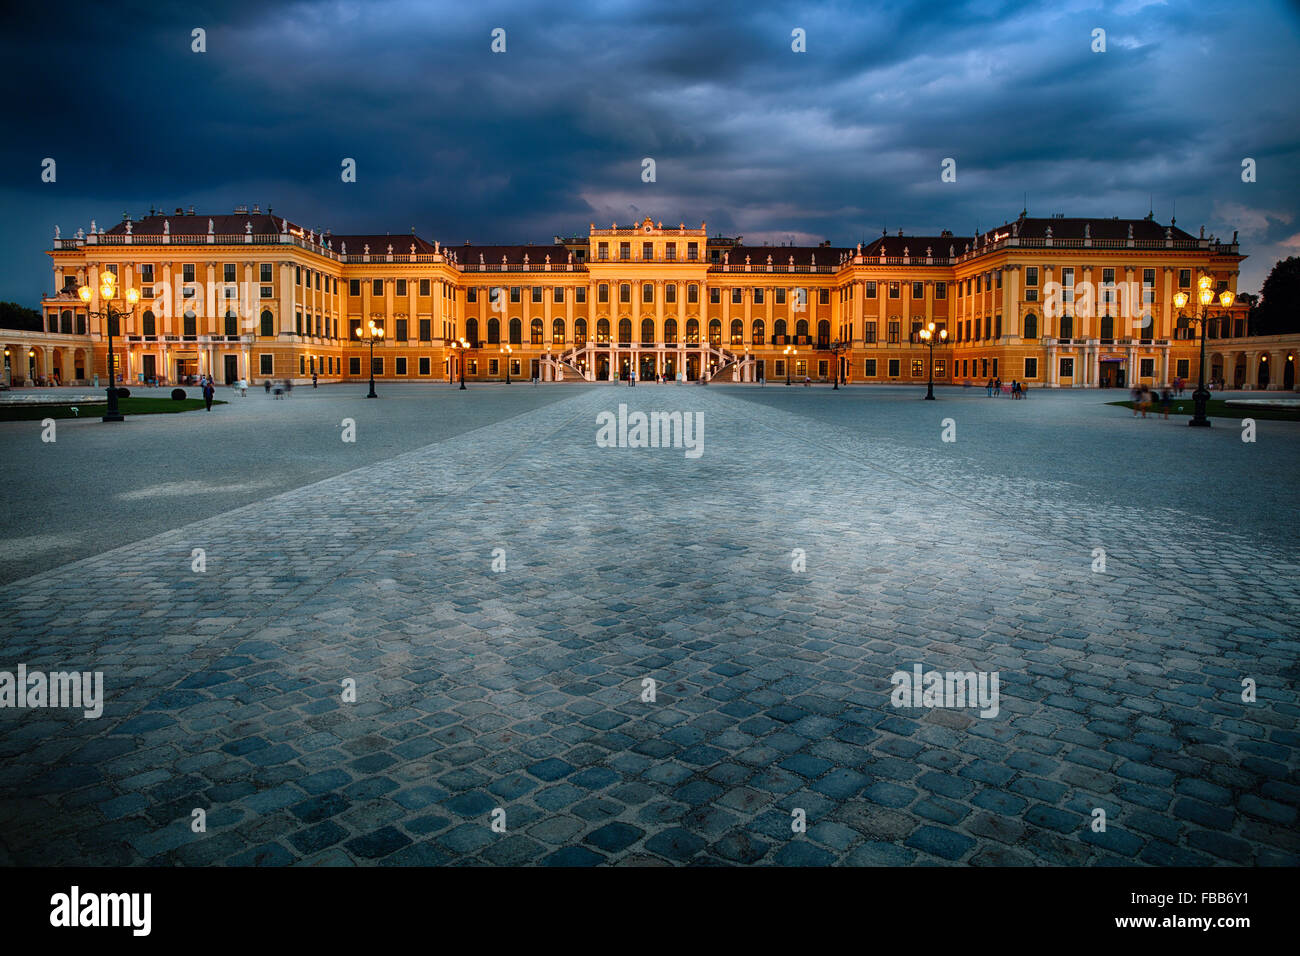 Low Angle View of a Baroque Palace Lit at Night, Schonbrunn Palace, Vienna, Austria Stock Photo